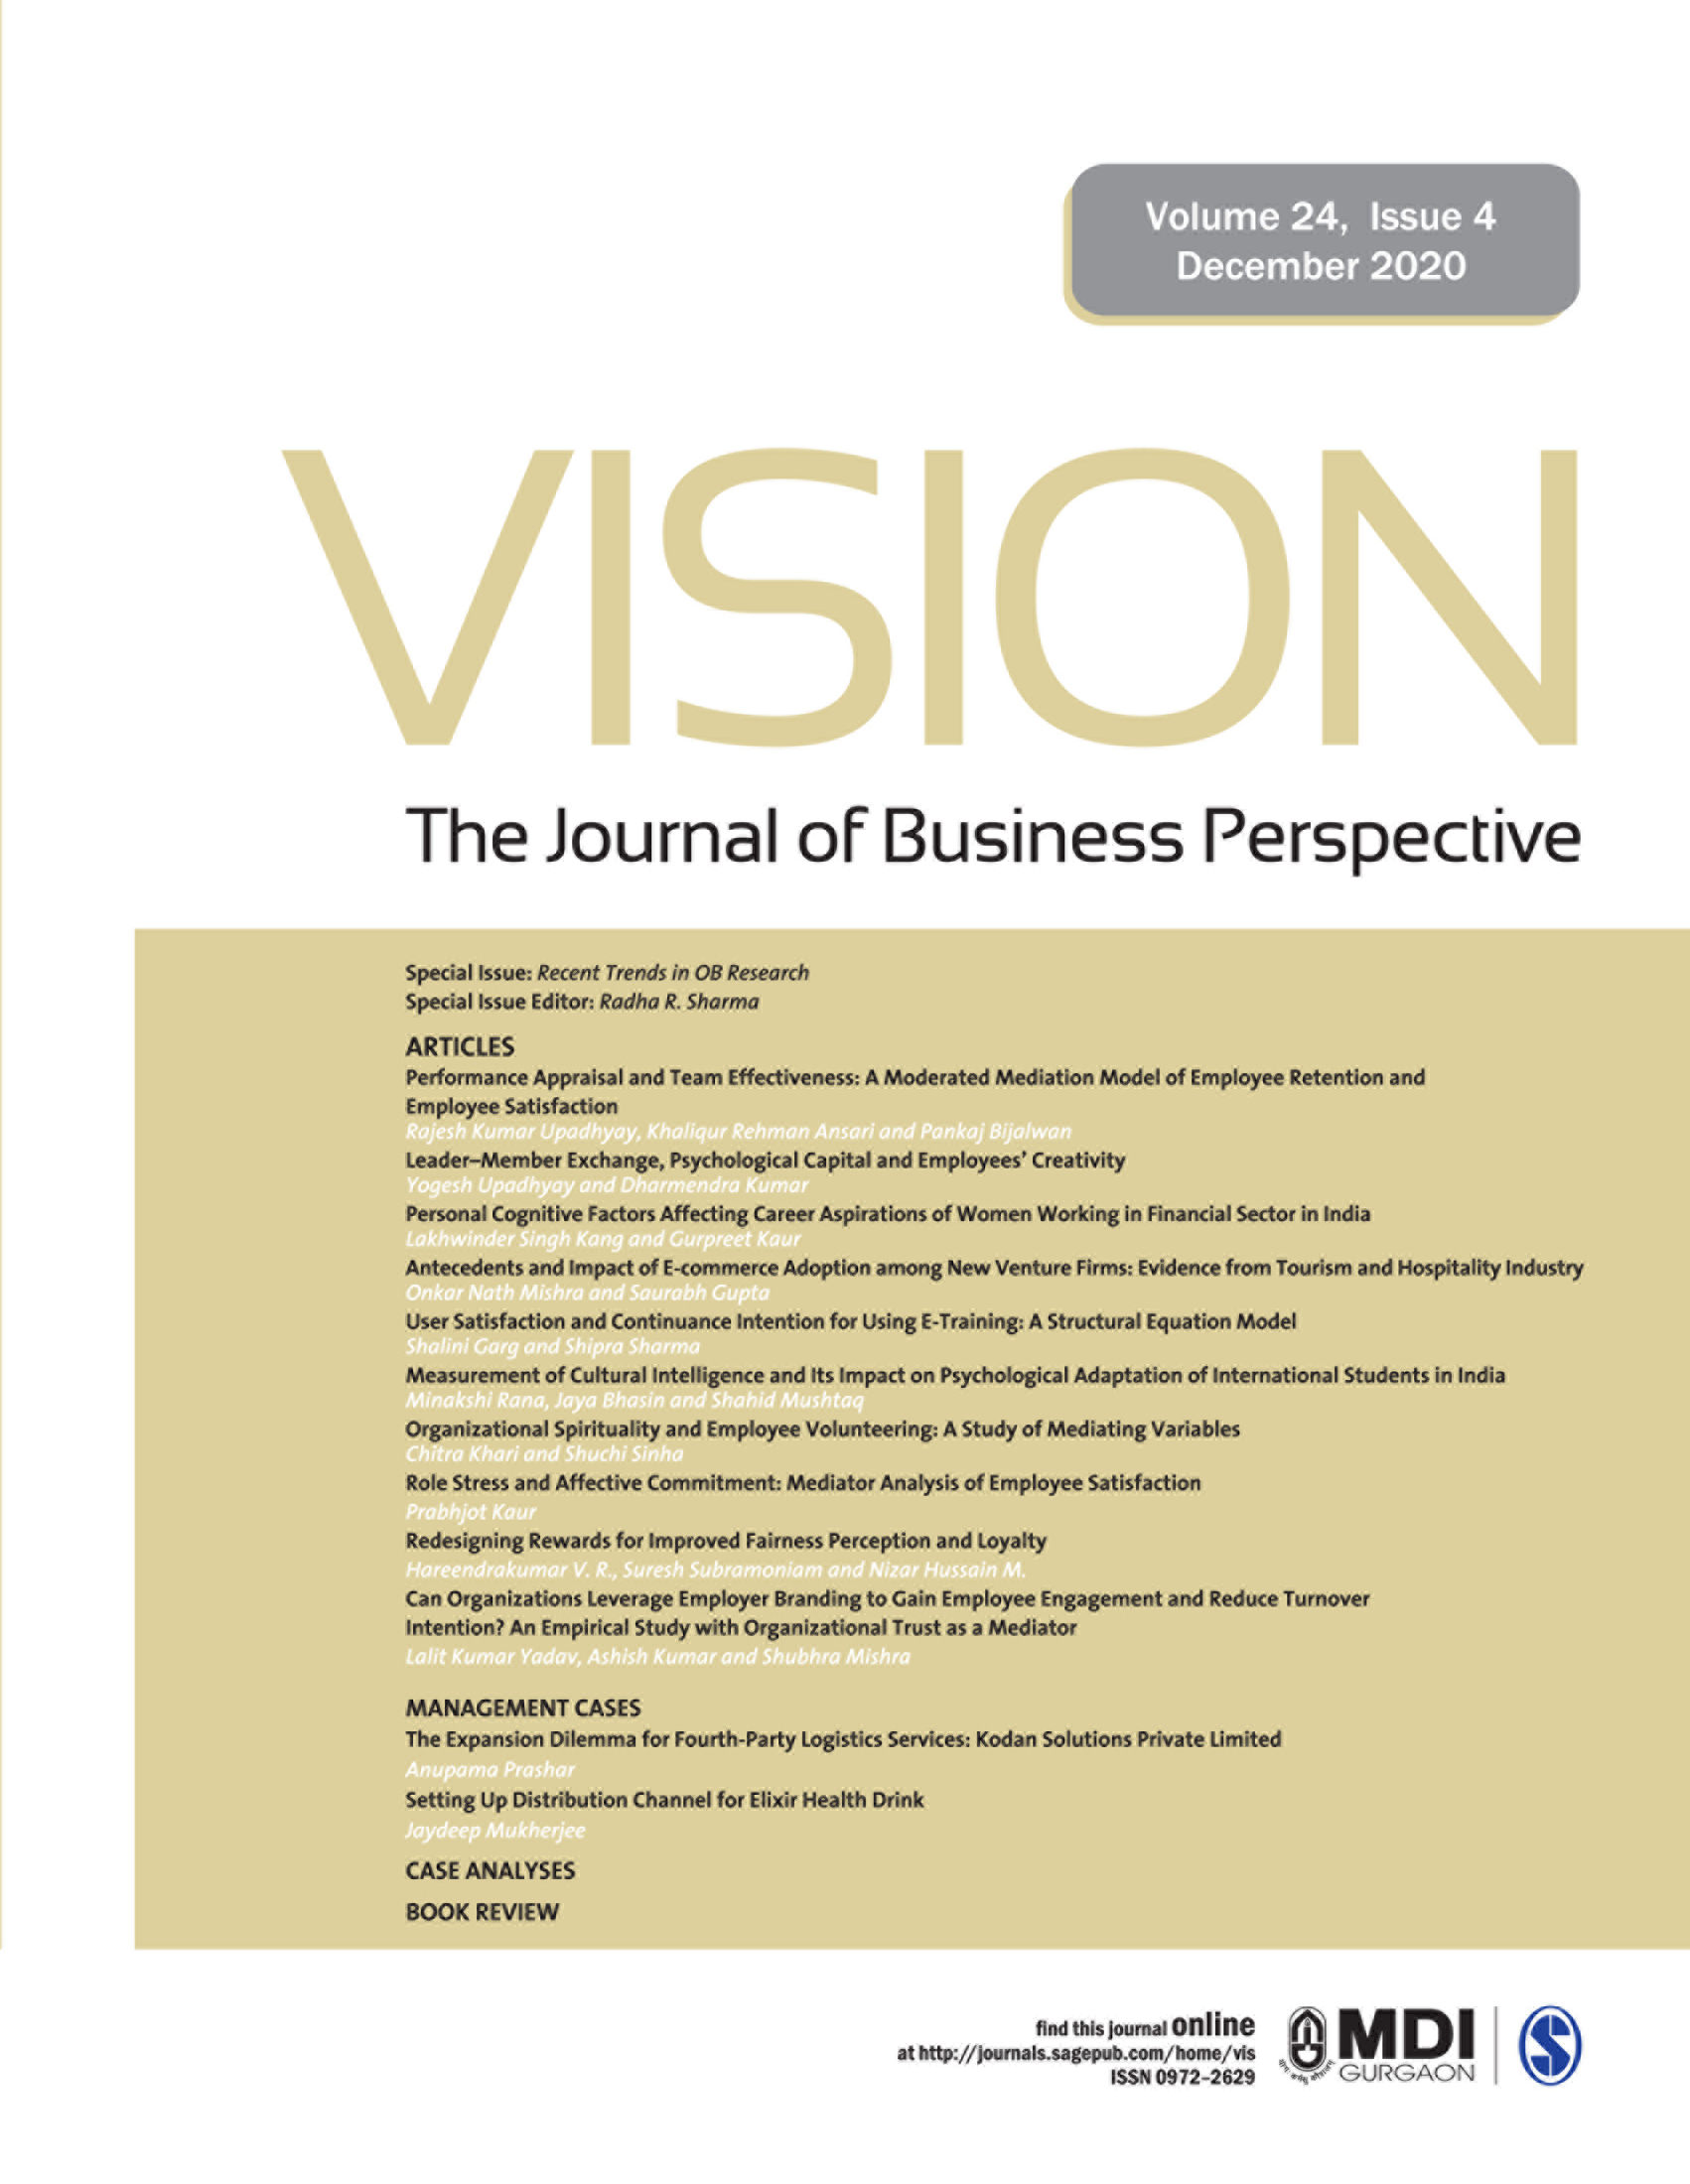 Vision: The Journal of Business Perspective